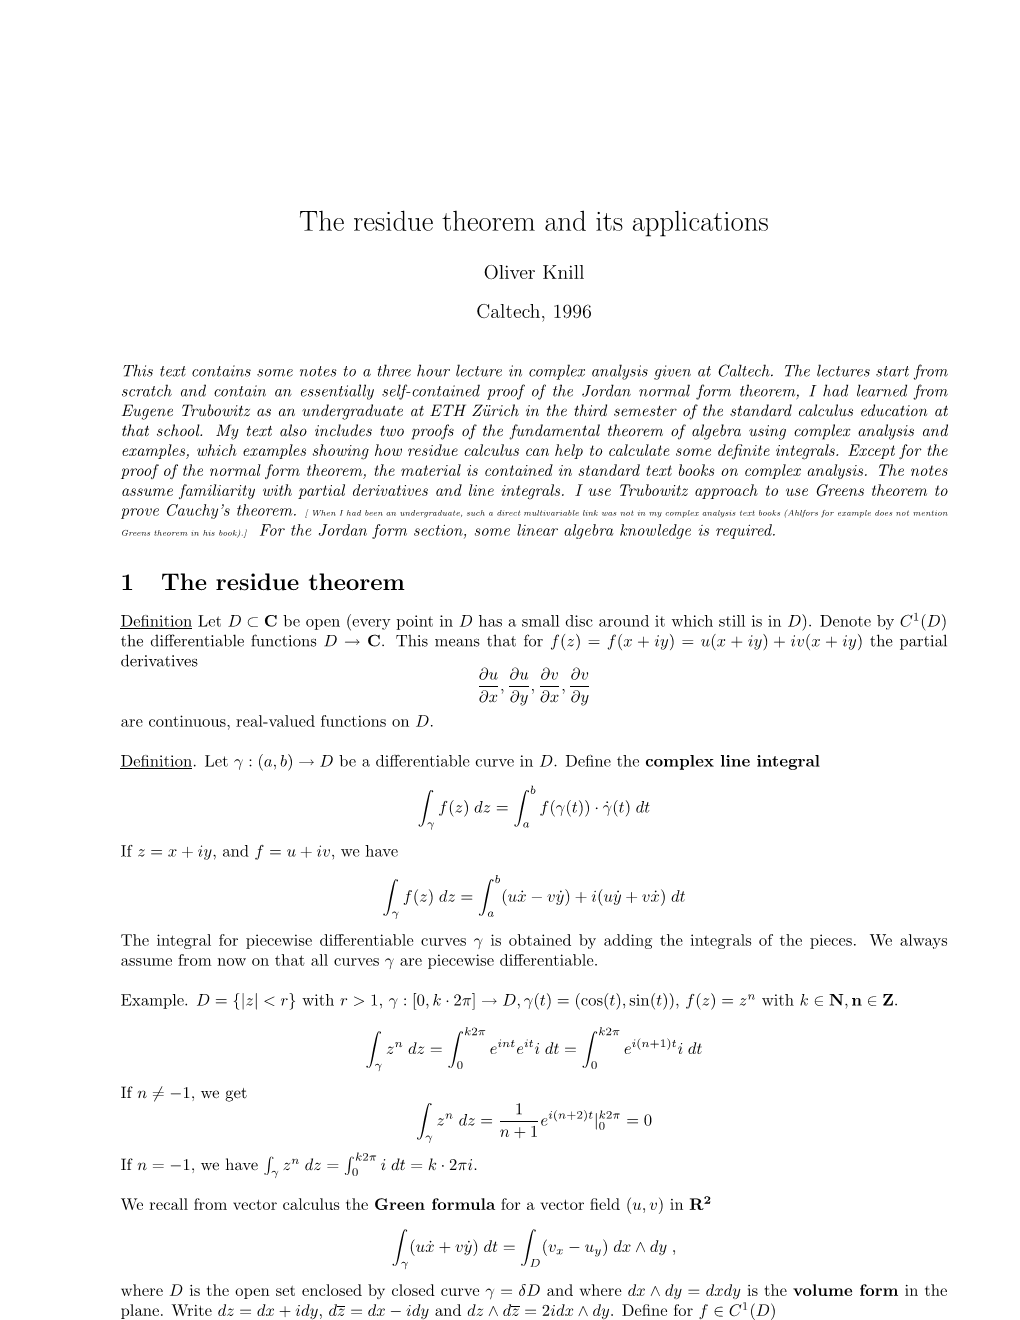 The Residue Theorem and Its Applications